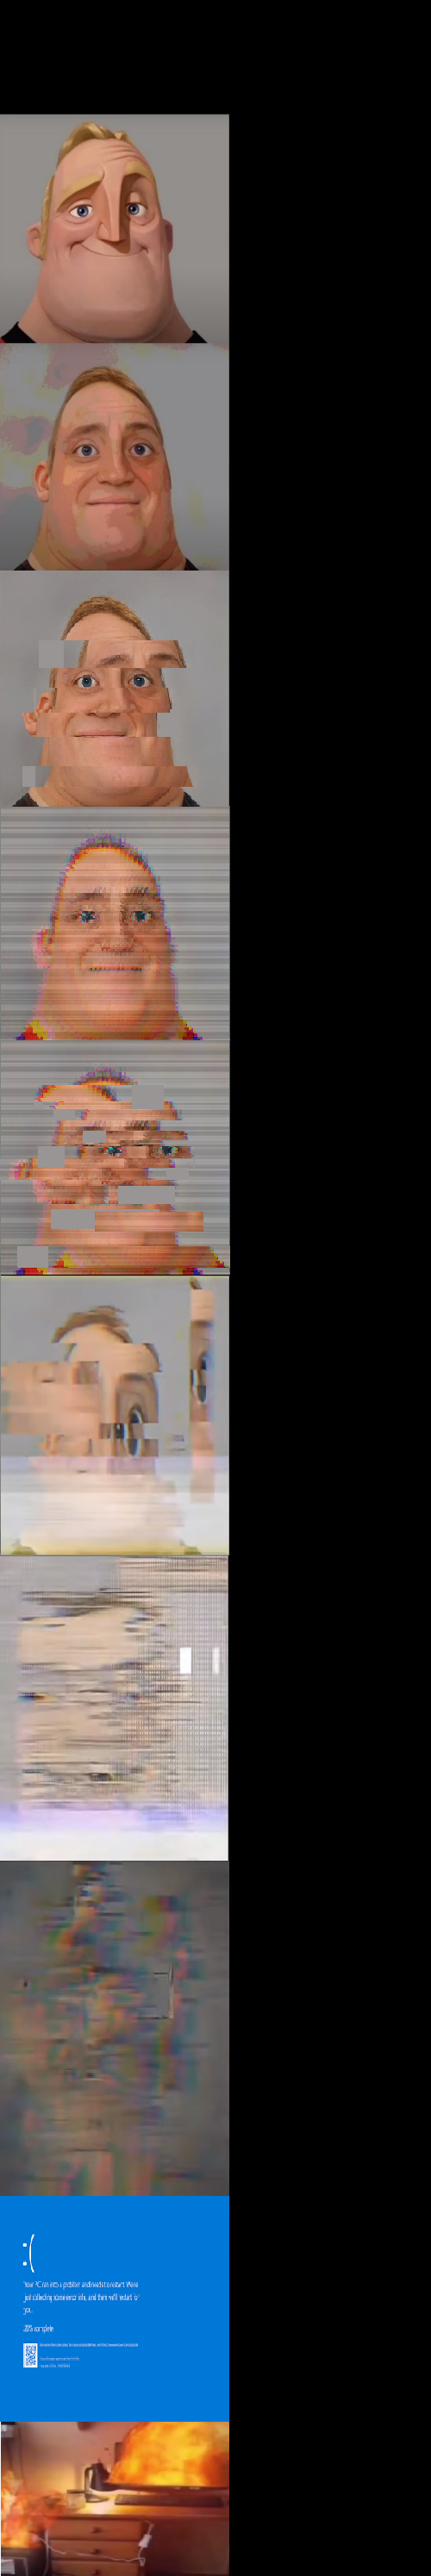 mr incredible becoming glitched template Blank Meme Template